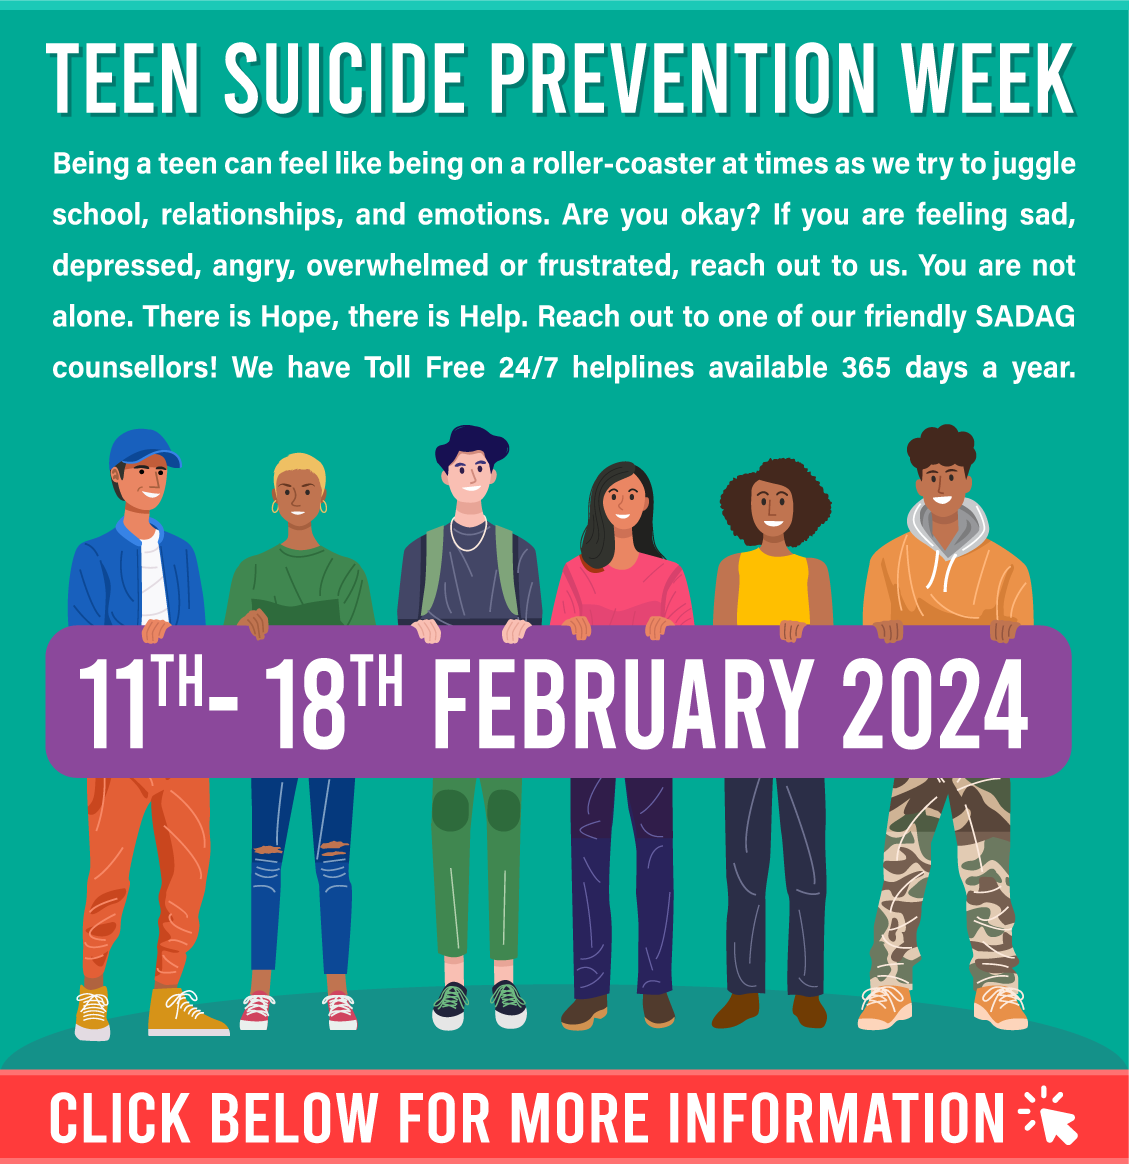 Teen Suicide Prevention Week Introduction